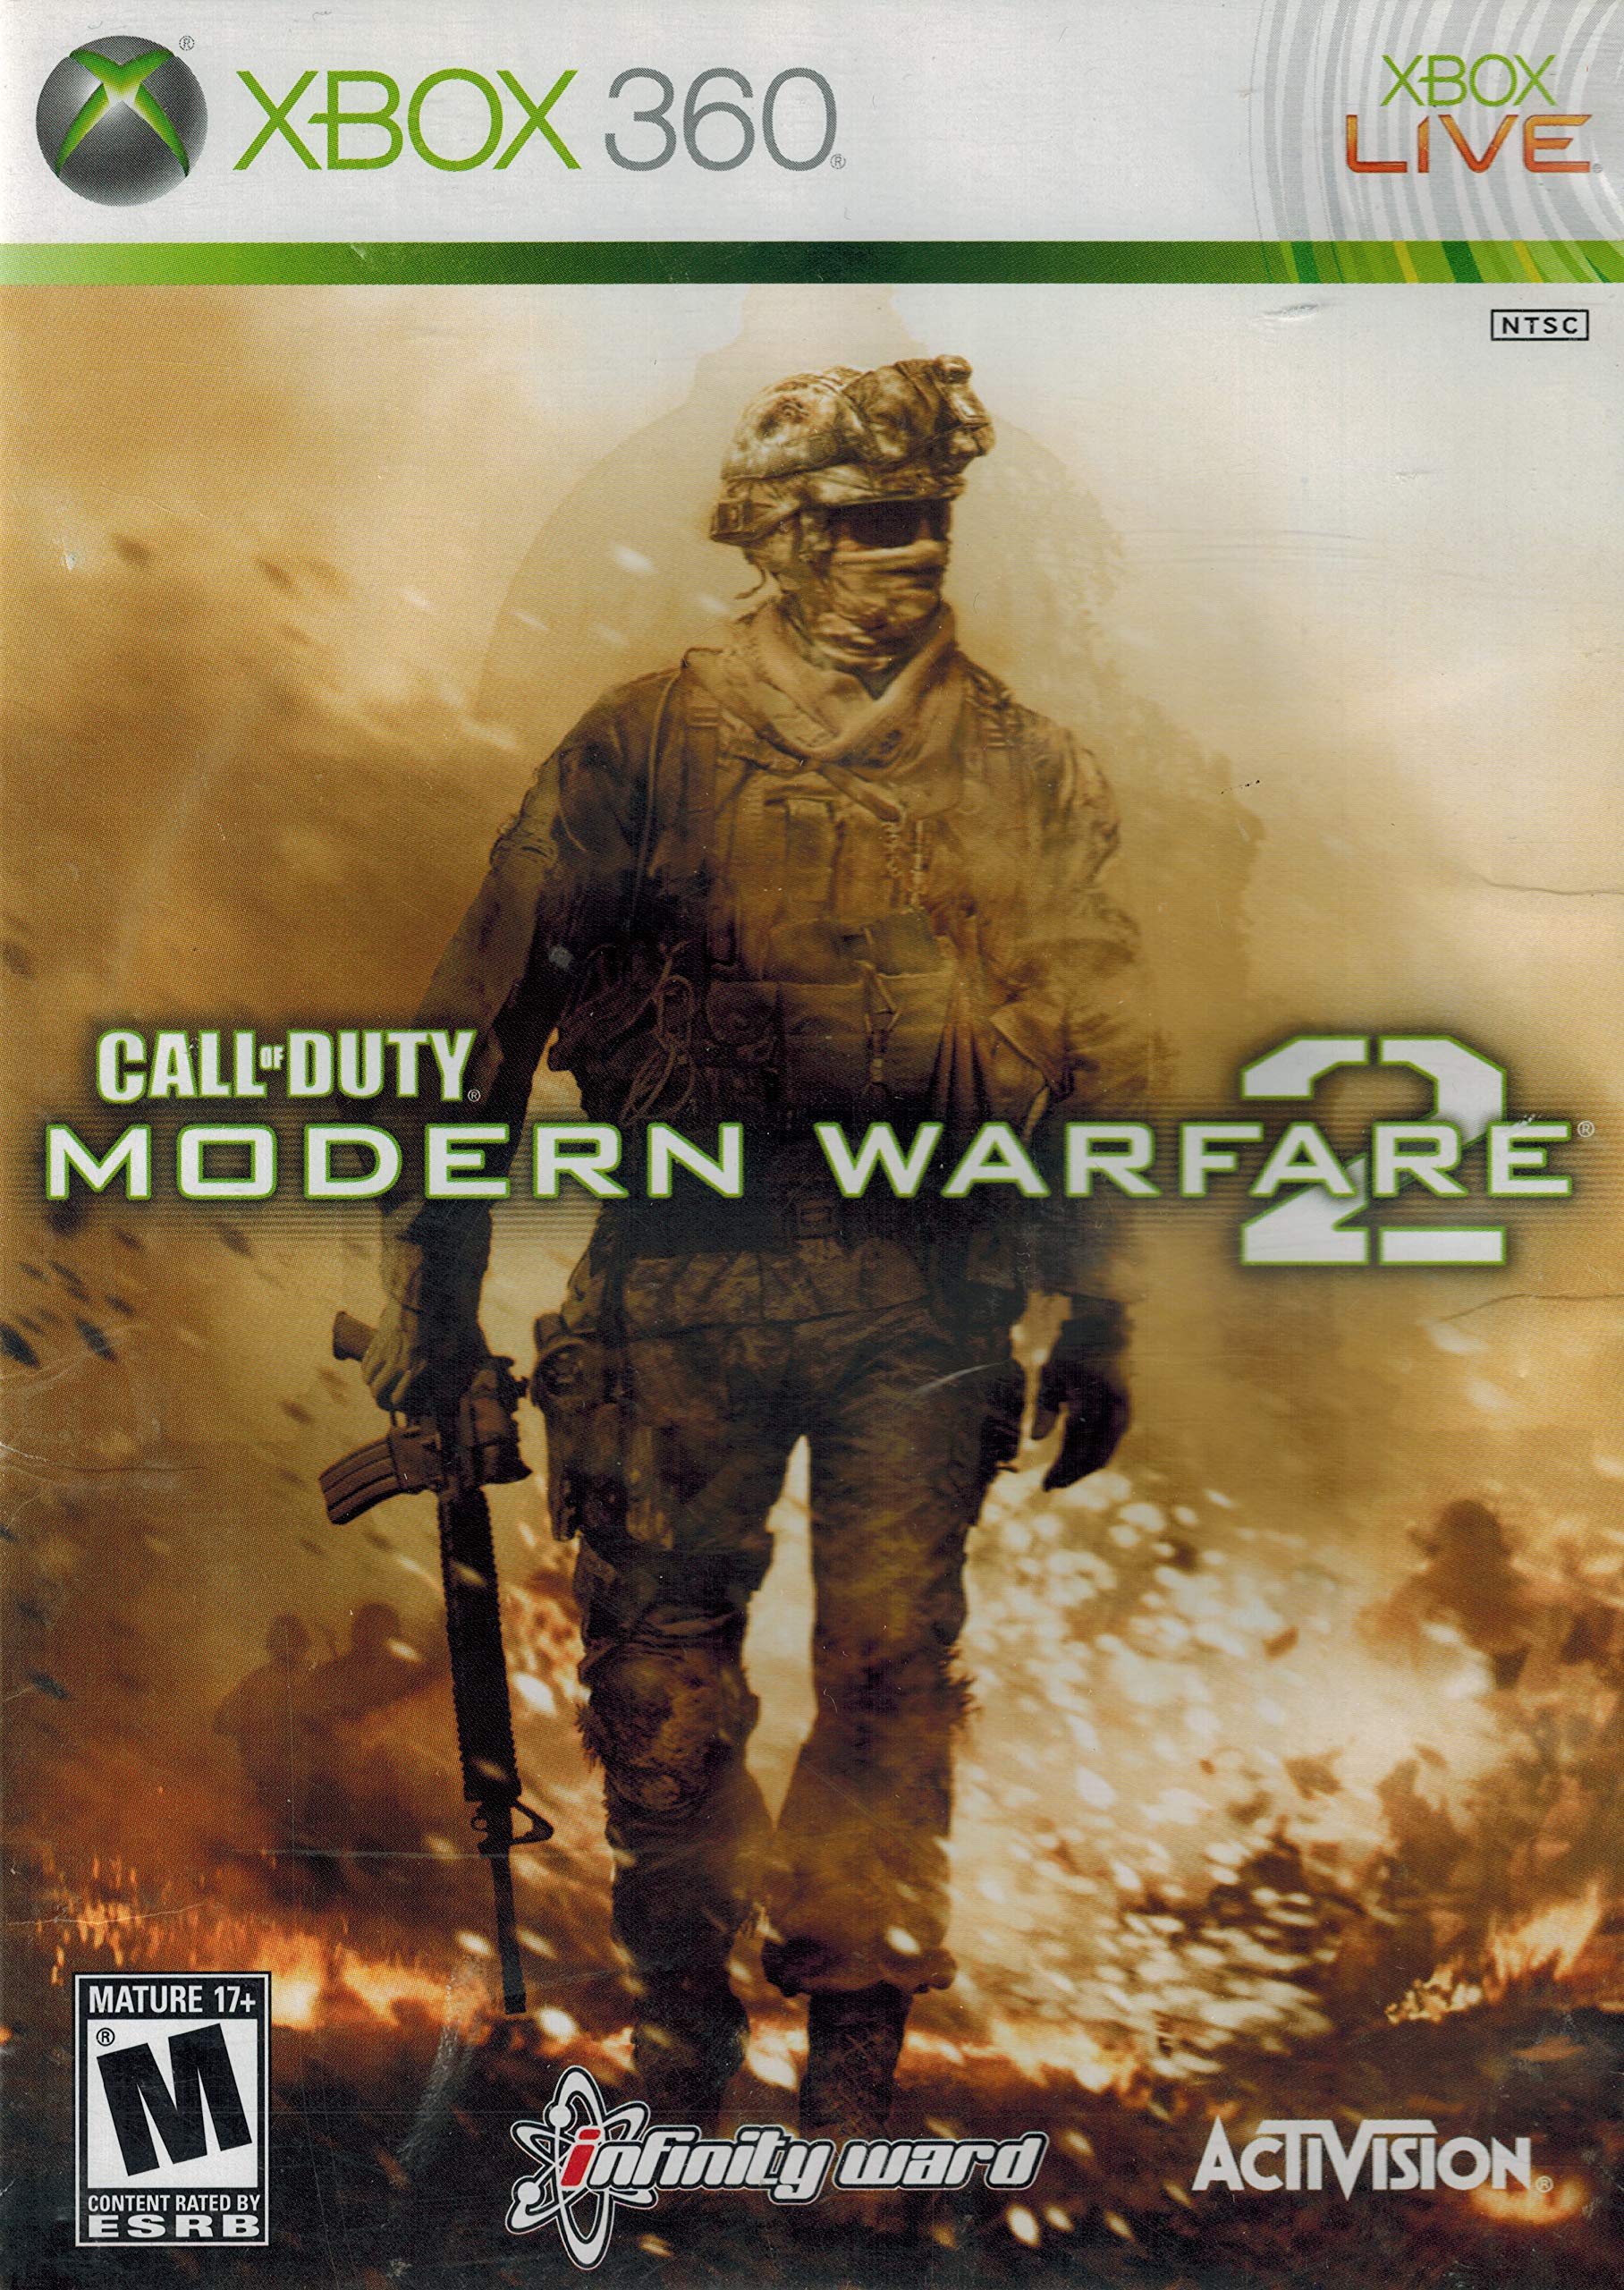 Activision Call of Duty: Modern Warfare 2 PH (Xbox 360) - image 1 of 2